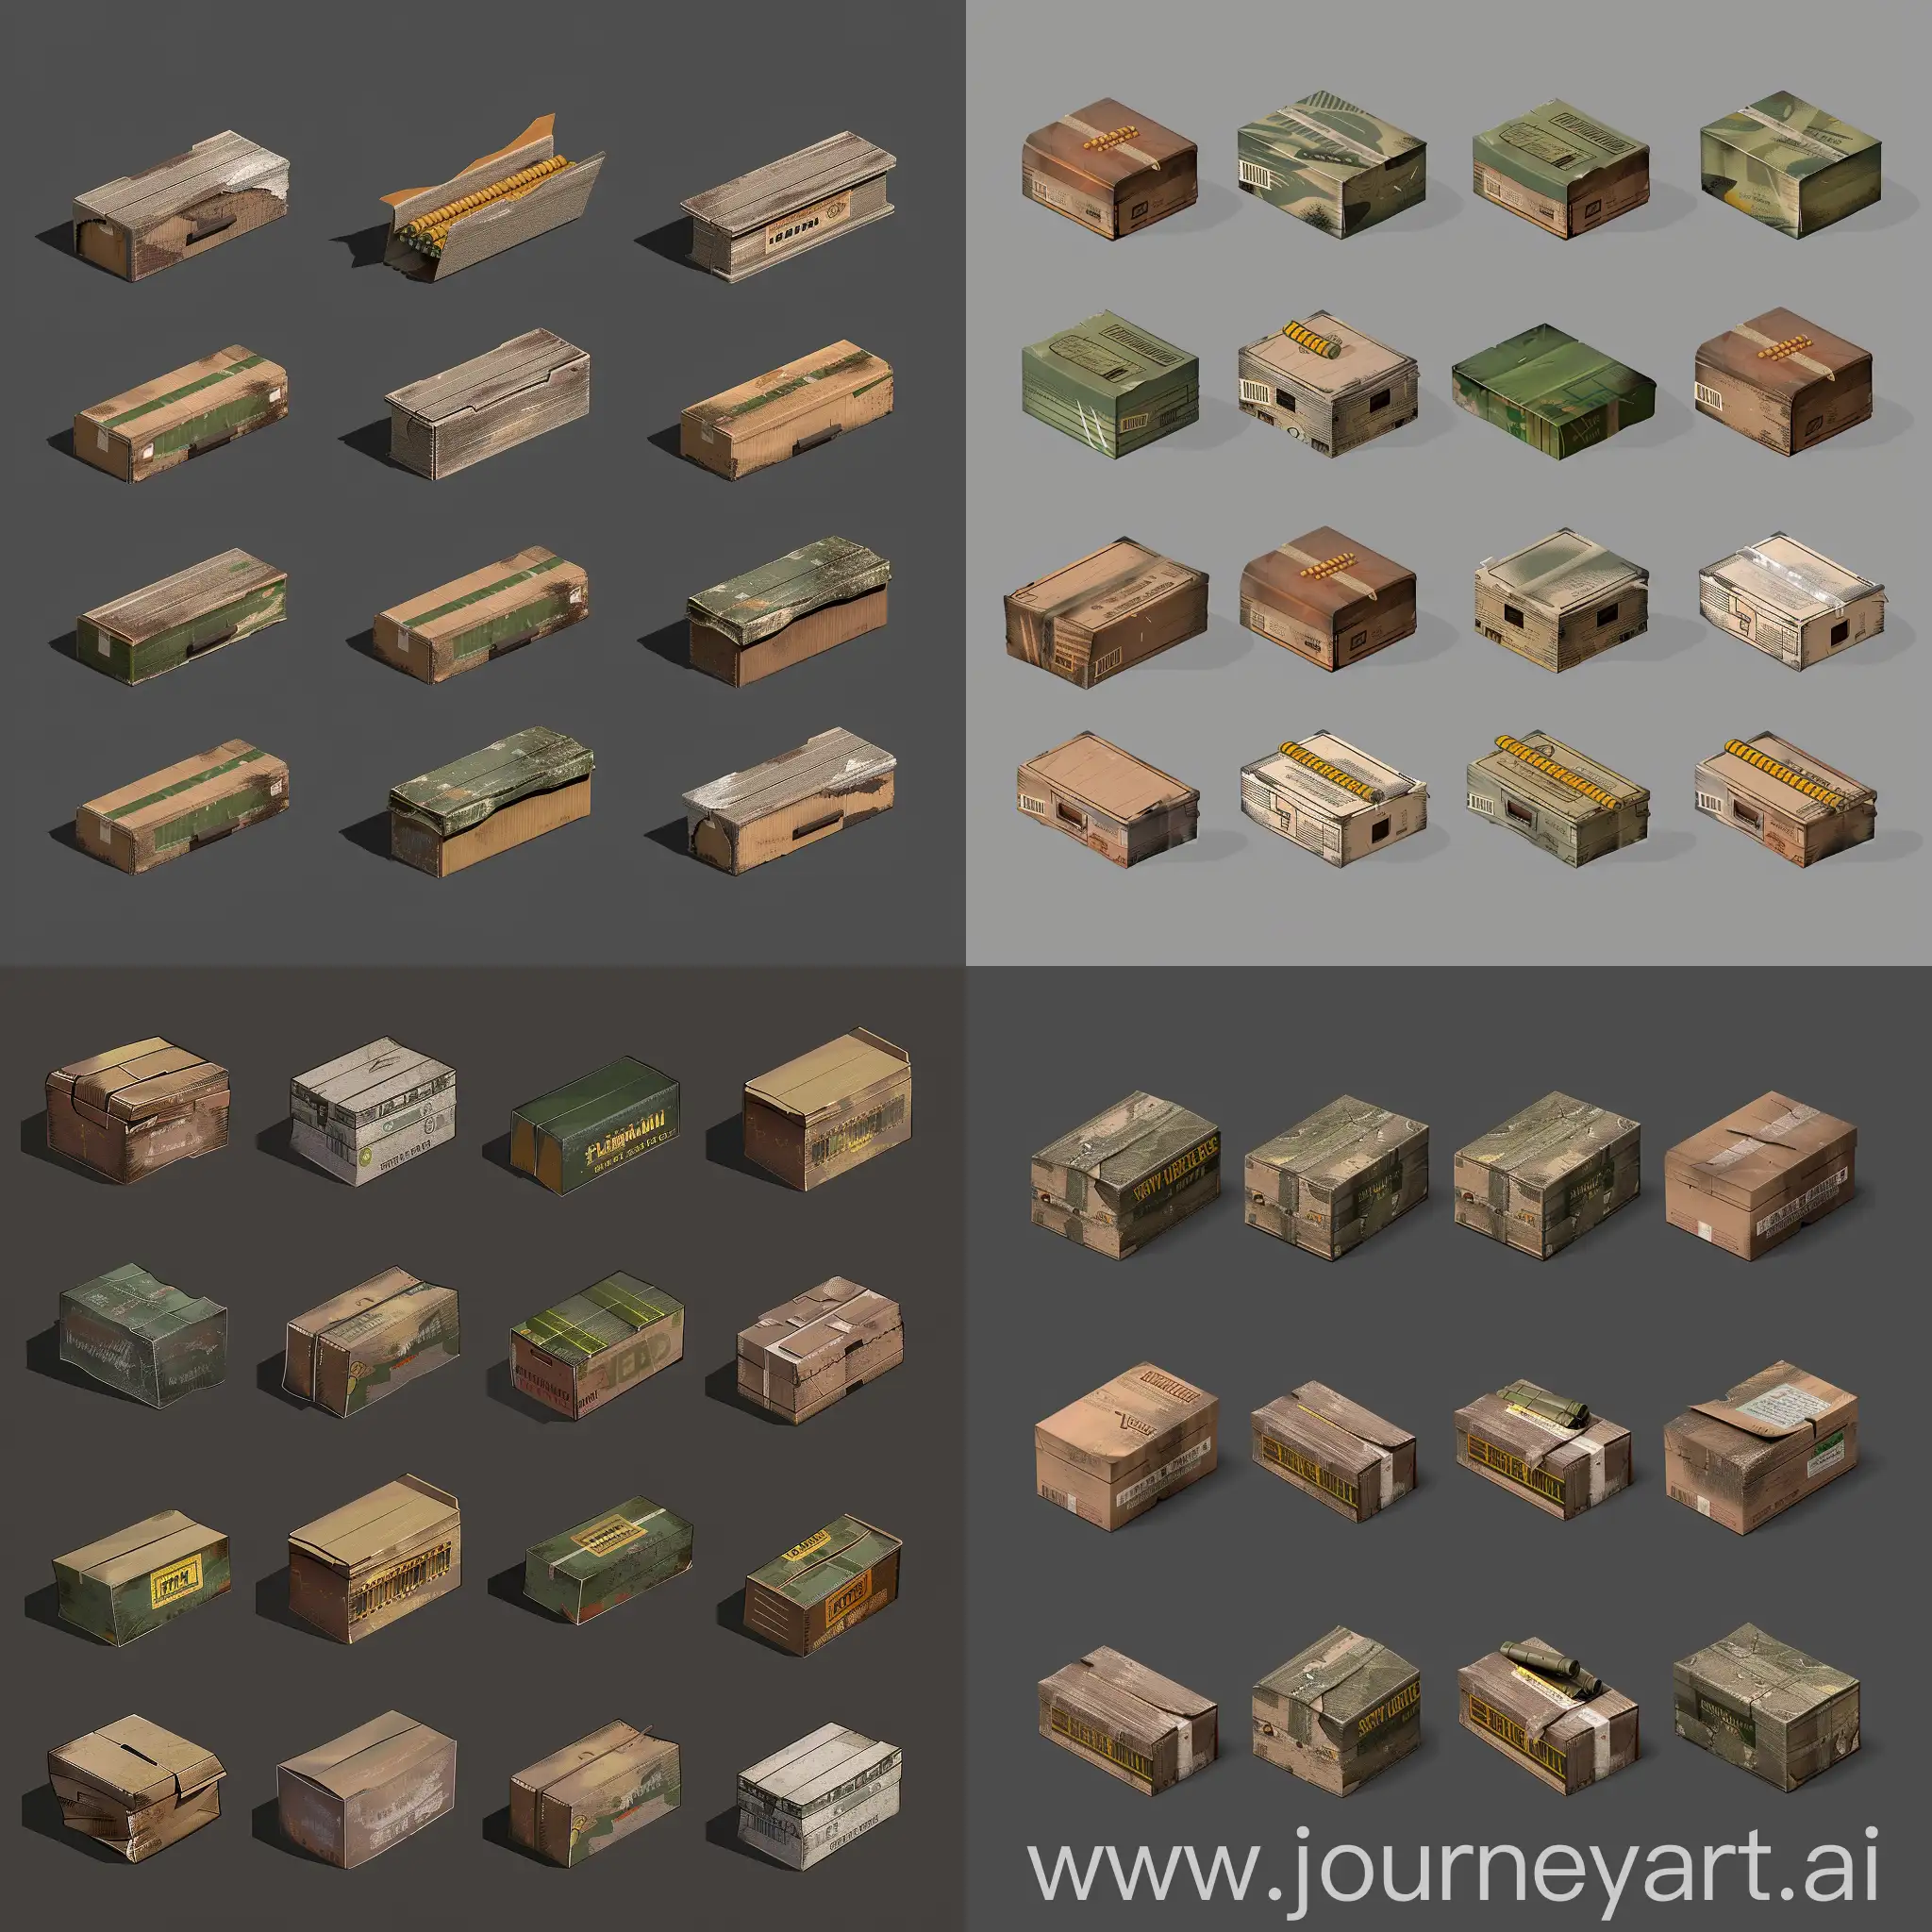 https://i.imgur.com/BK7uKCi.png realistic photo isometric set of worn realistic oblong ammo cardboard boxes in style of blender realistic 3d games asset, isometric set, orthographic projection